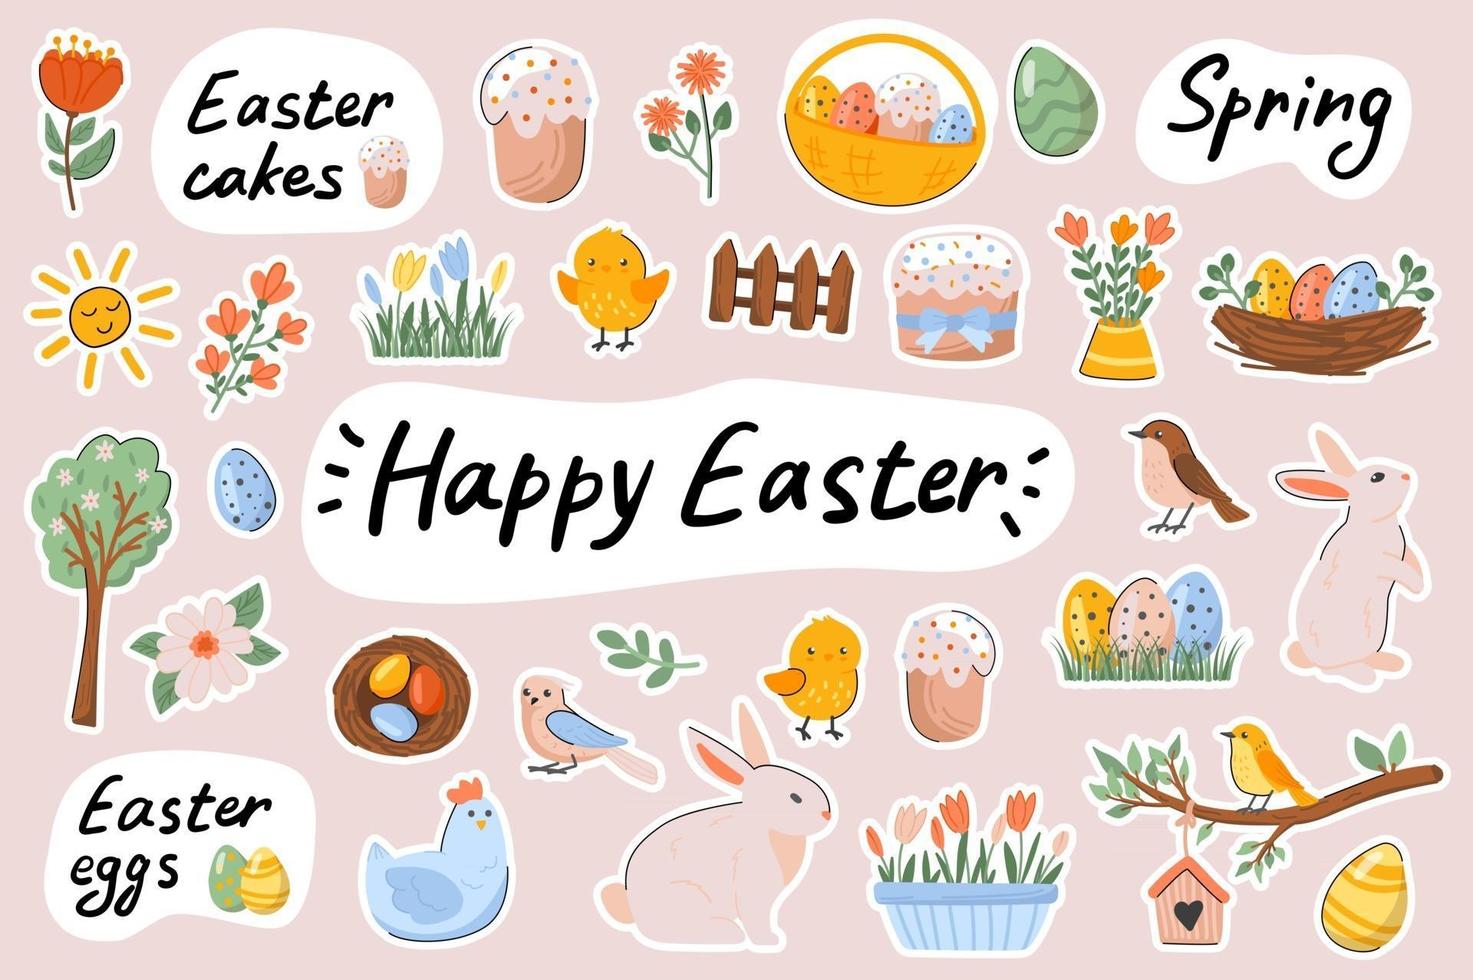 Happy Easter cute stickers template set vector